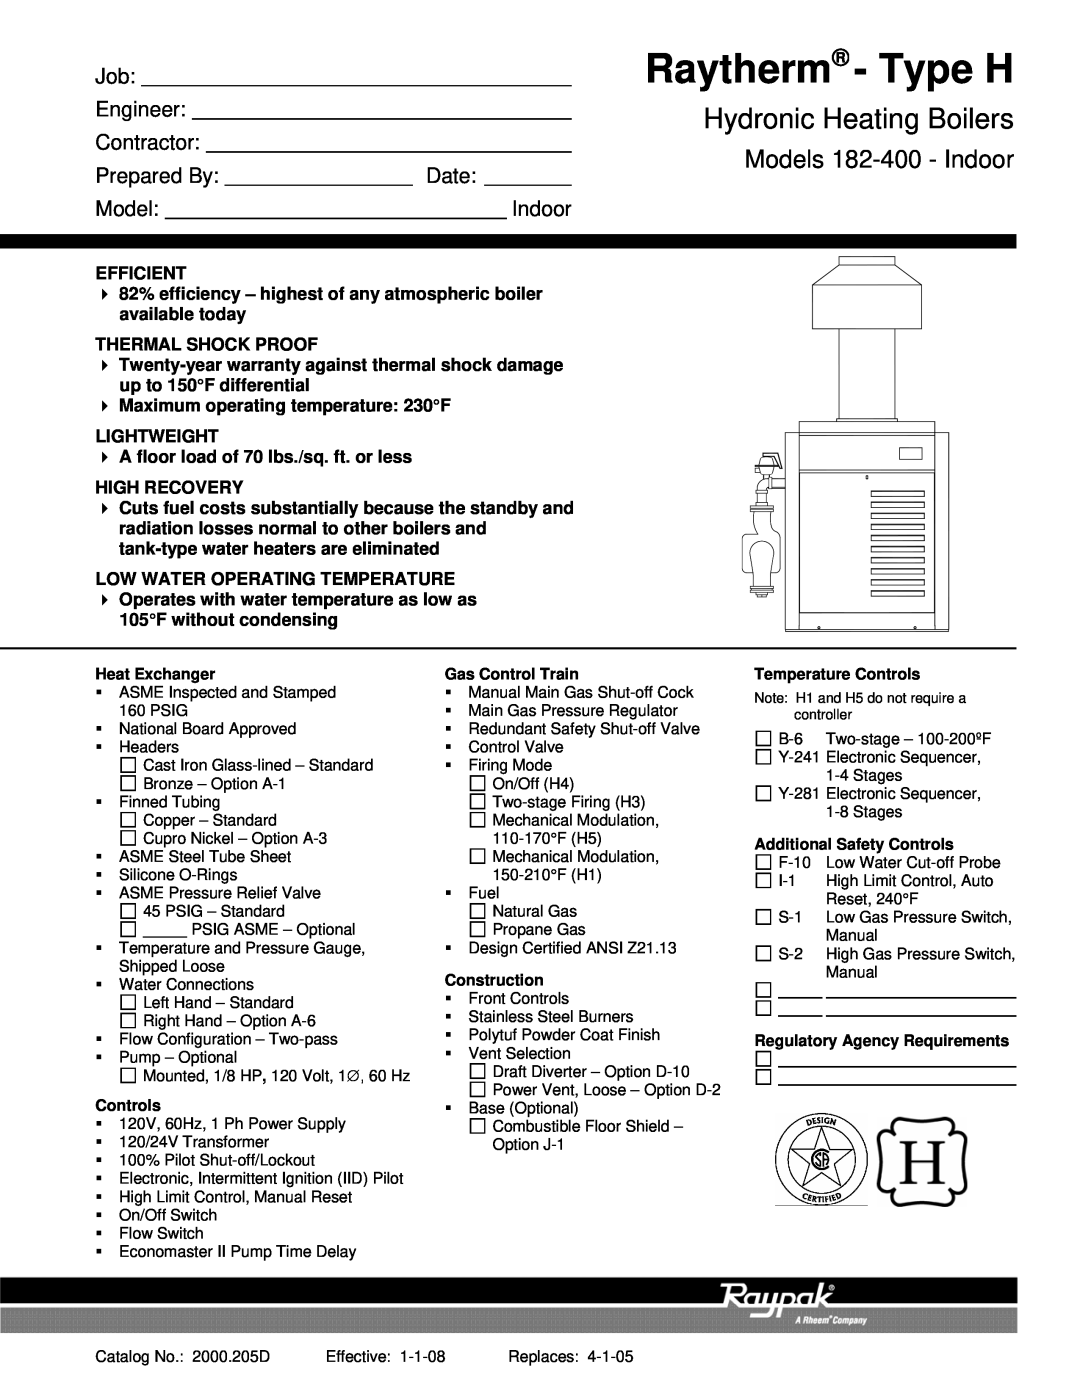 Raypak warranty Raytherm - Type H, Hydronic Heating Boilers, Models 182-400- Indoor, Engineer, Contractor, Prepared By 